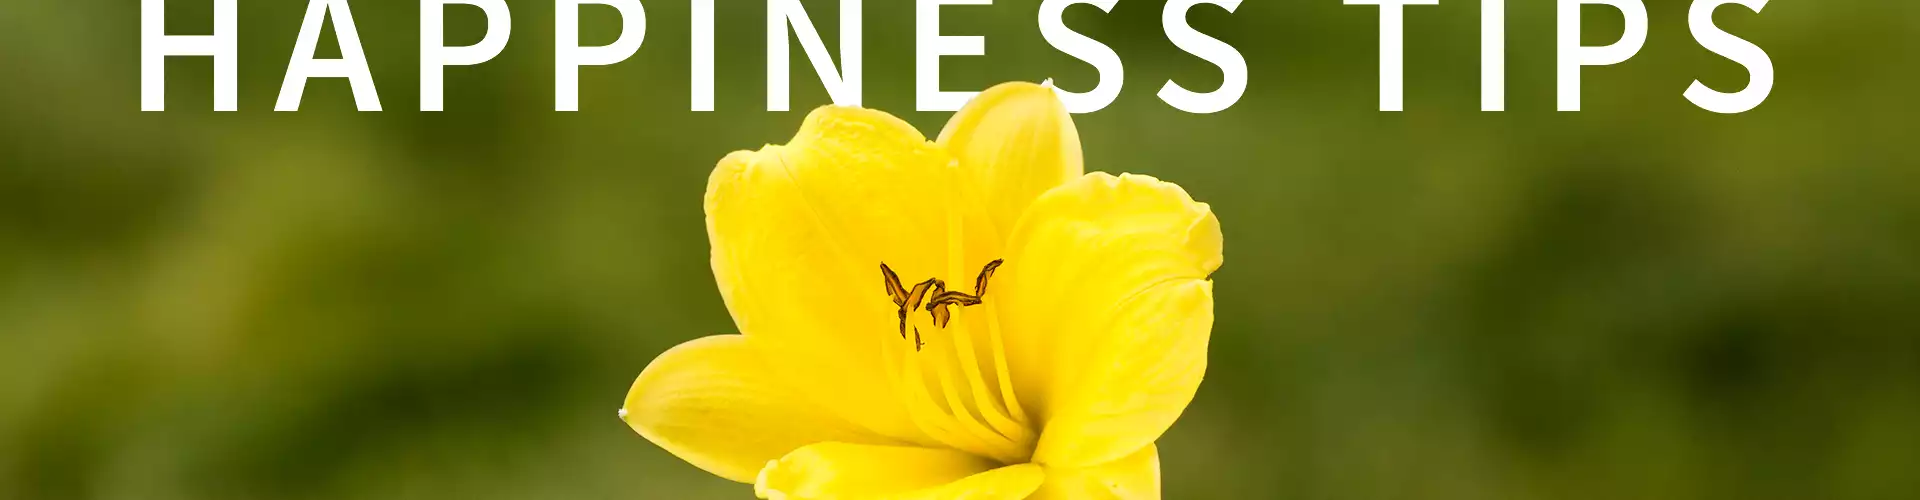 5 STEPS TO GREATER HAPPINESS  in Life + Business